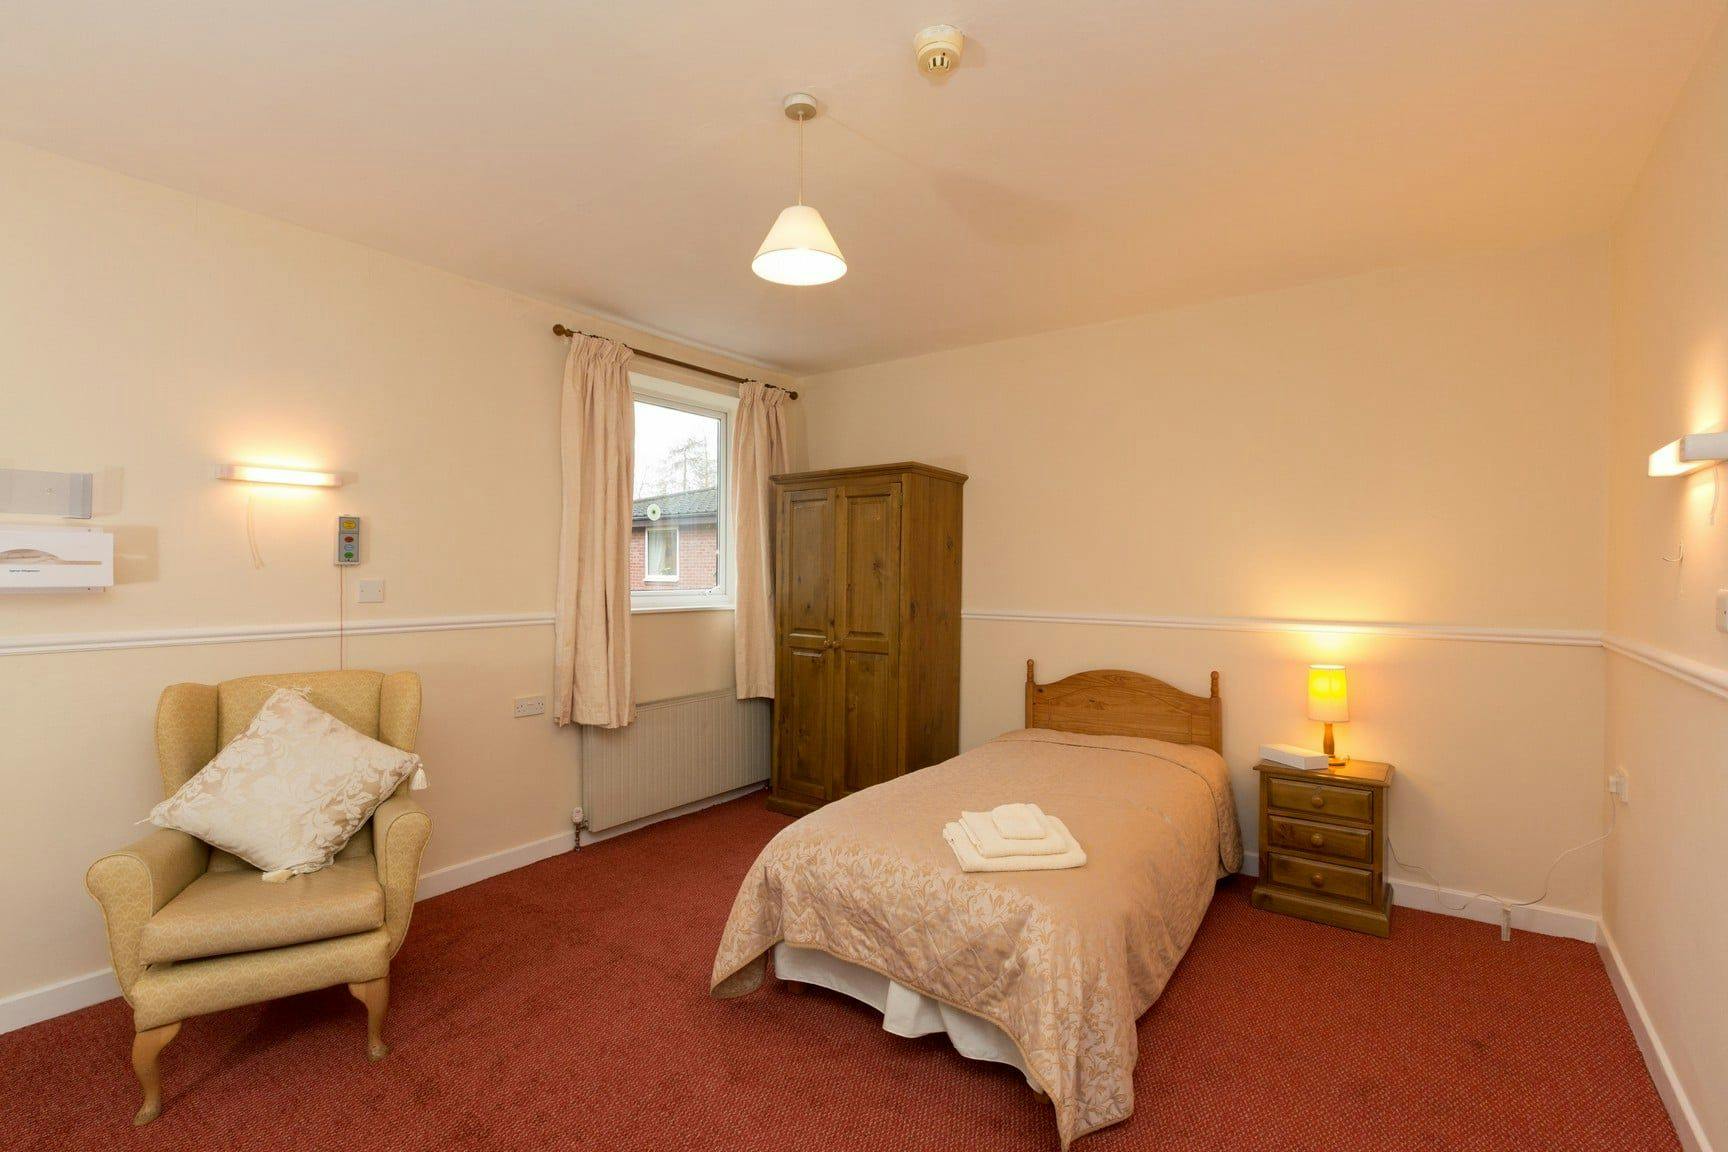 Bedroom at Hatton Court Care Home in Telford, Shropshire